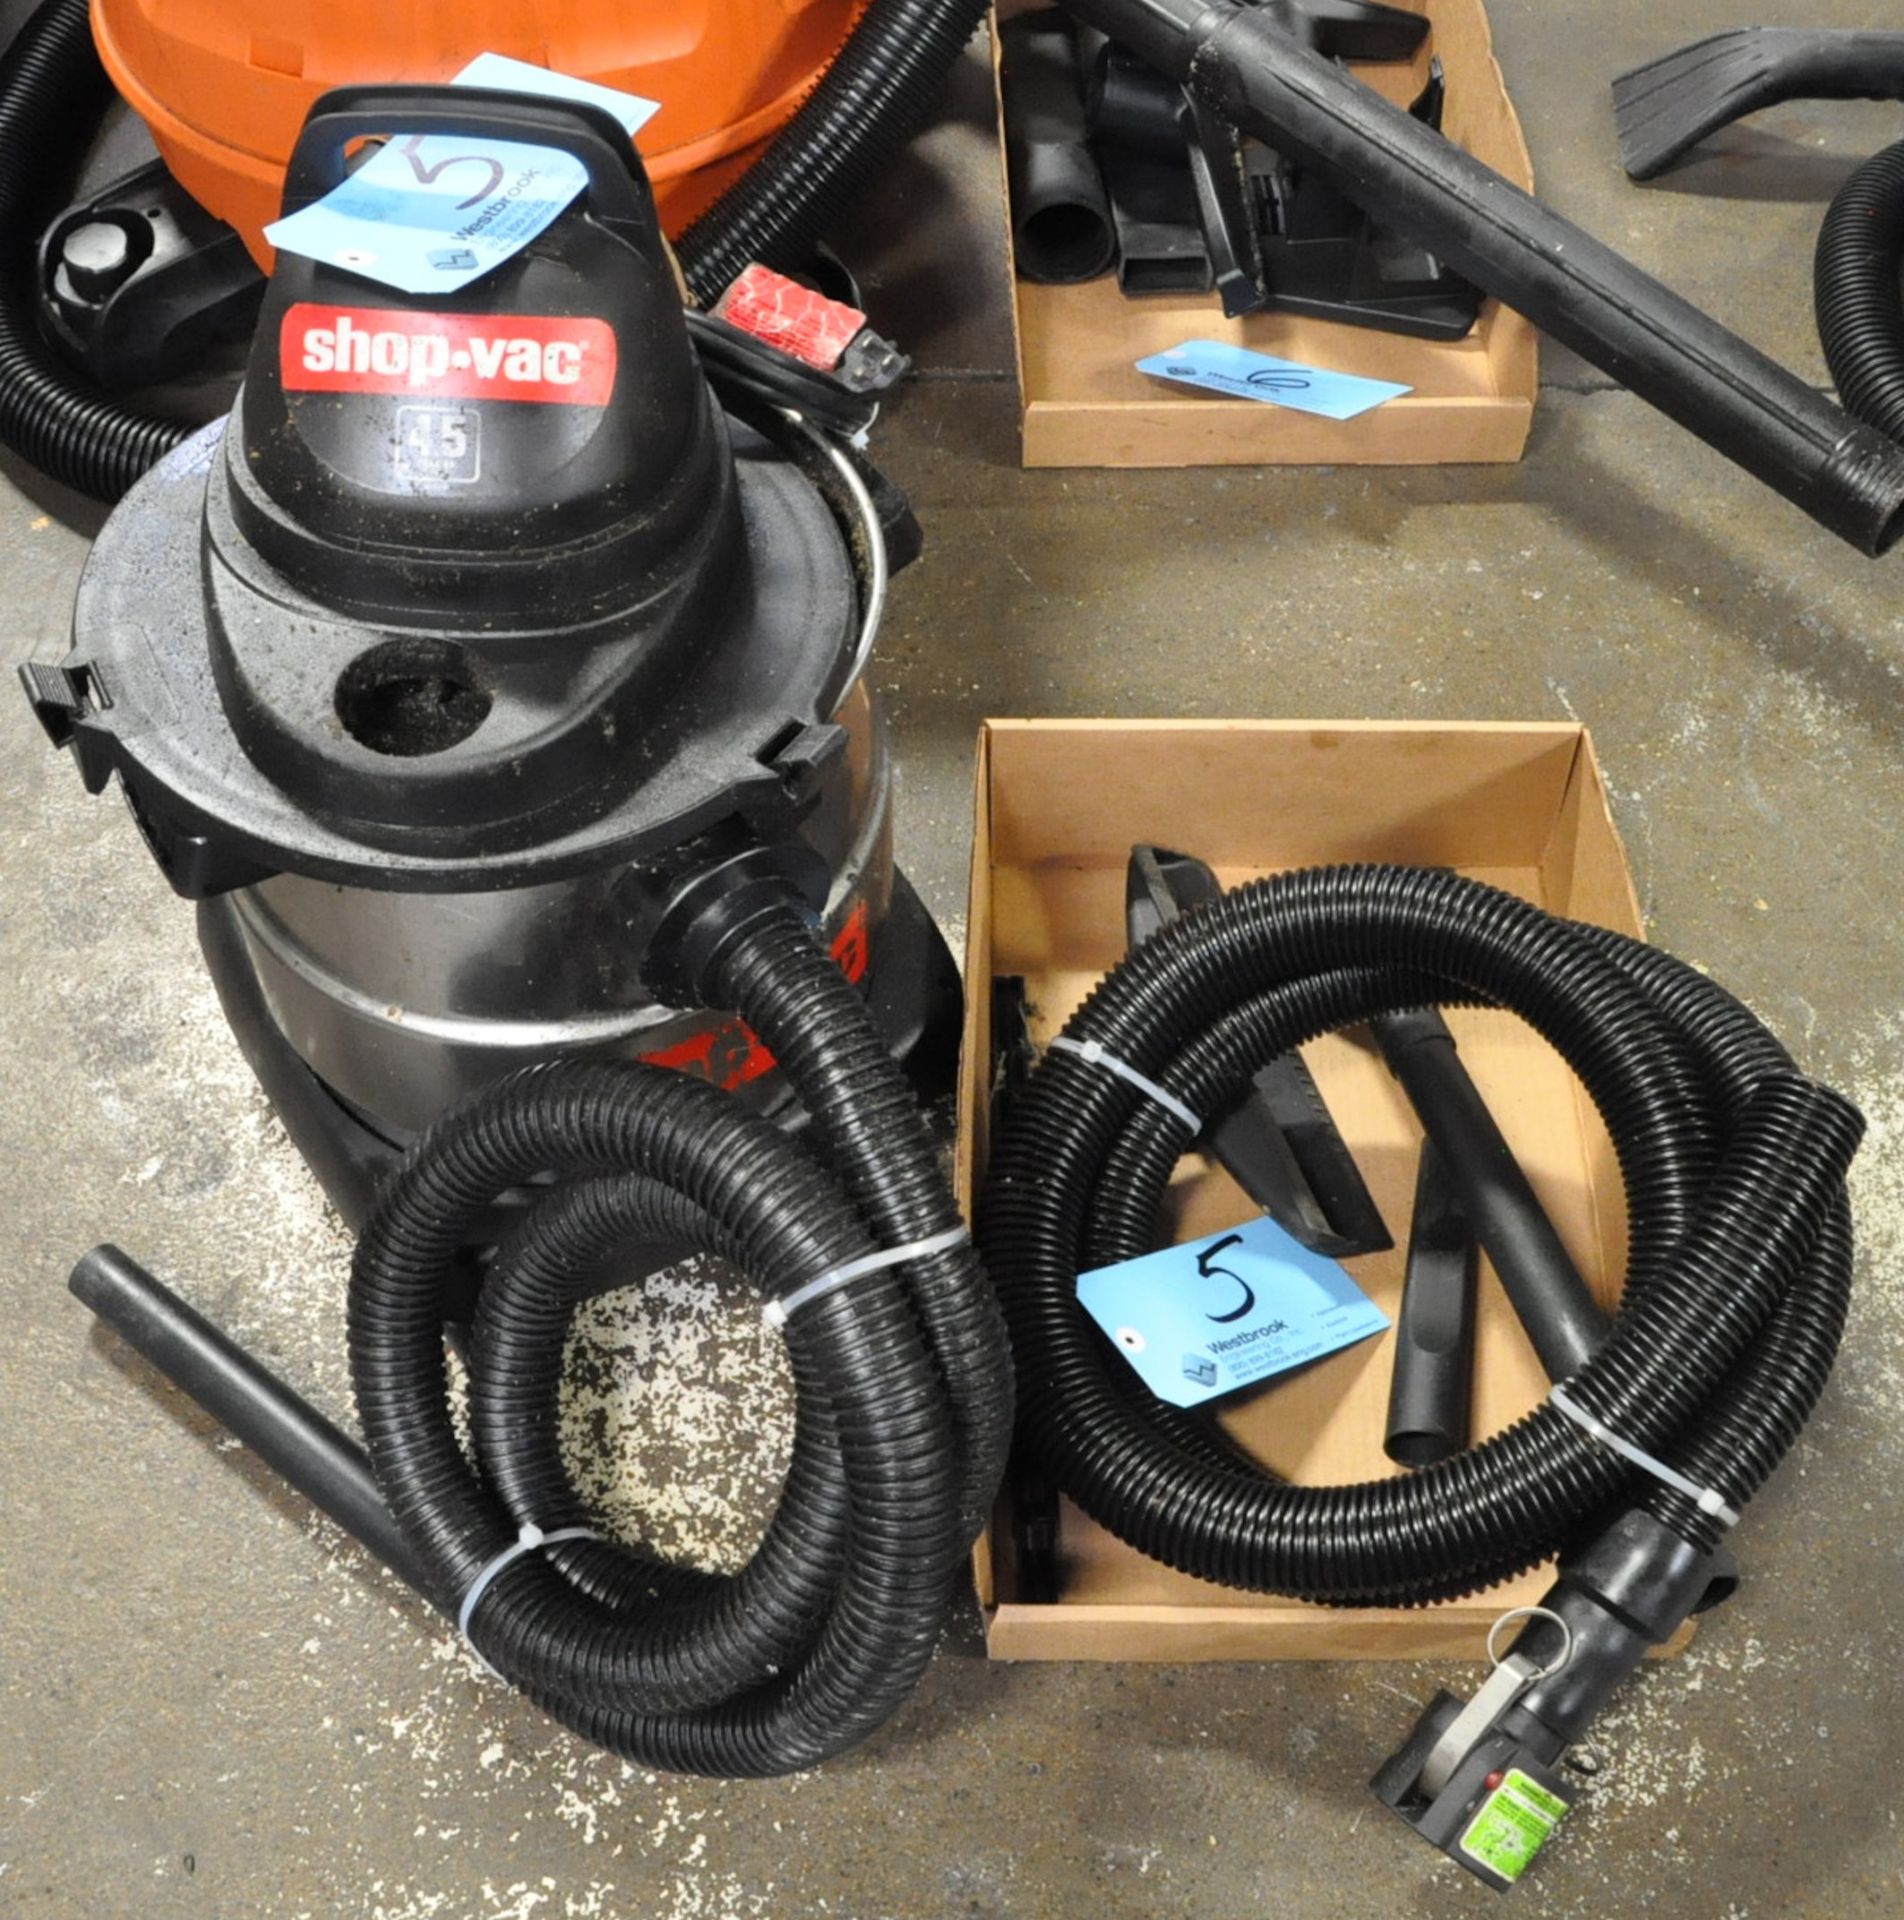 Portable Shop Vac with Hose and Attachments in (1) Box